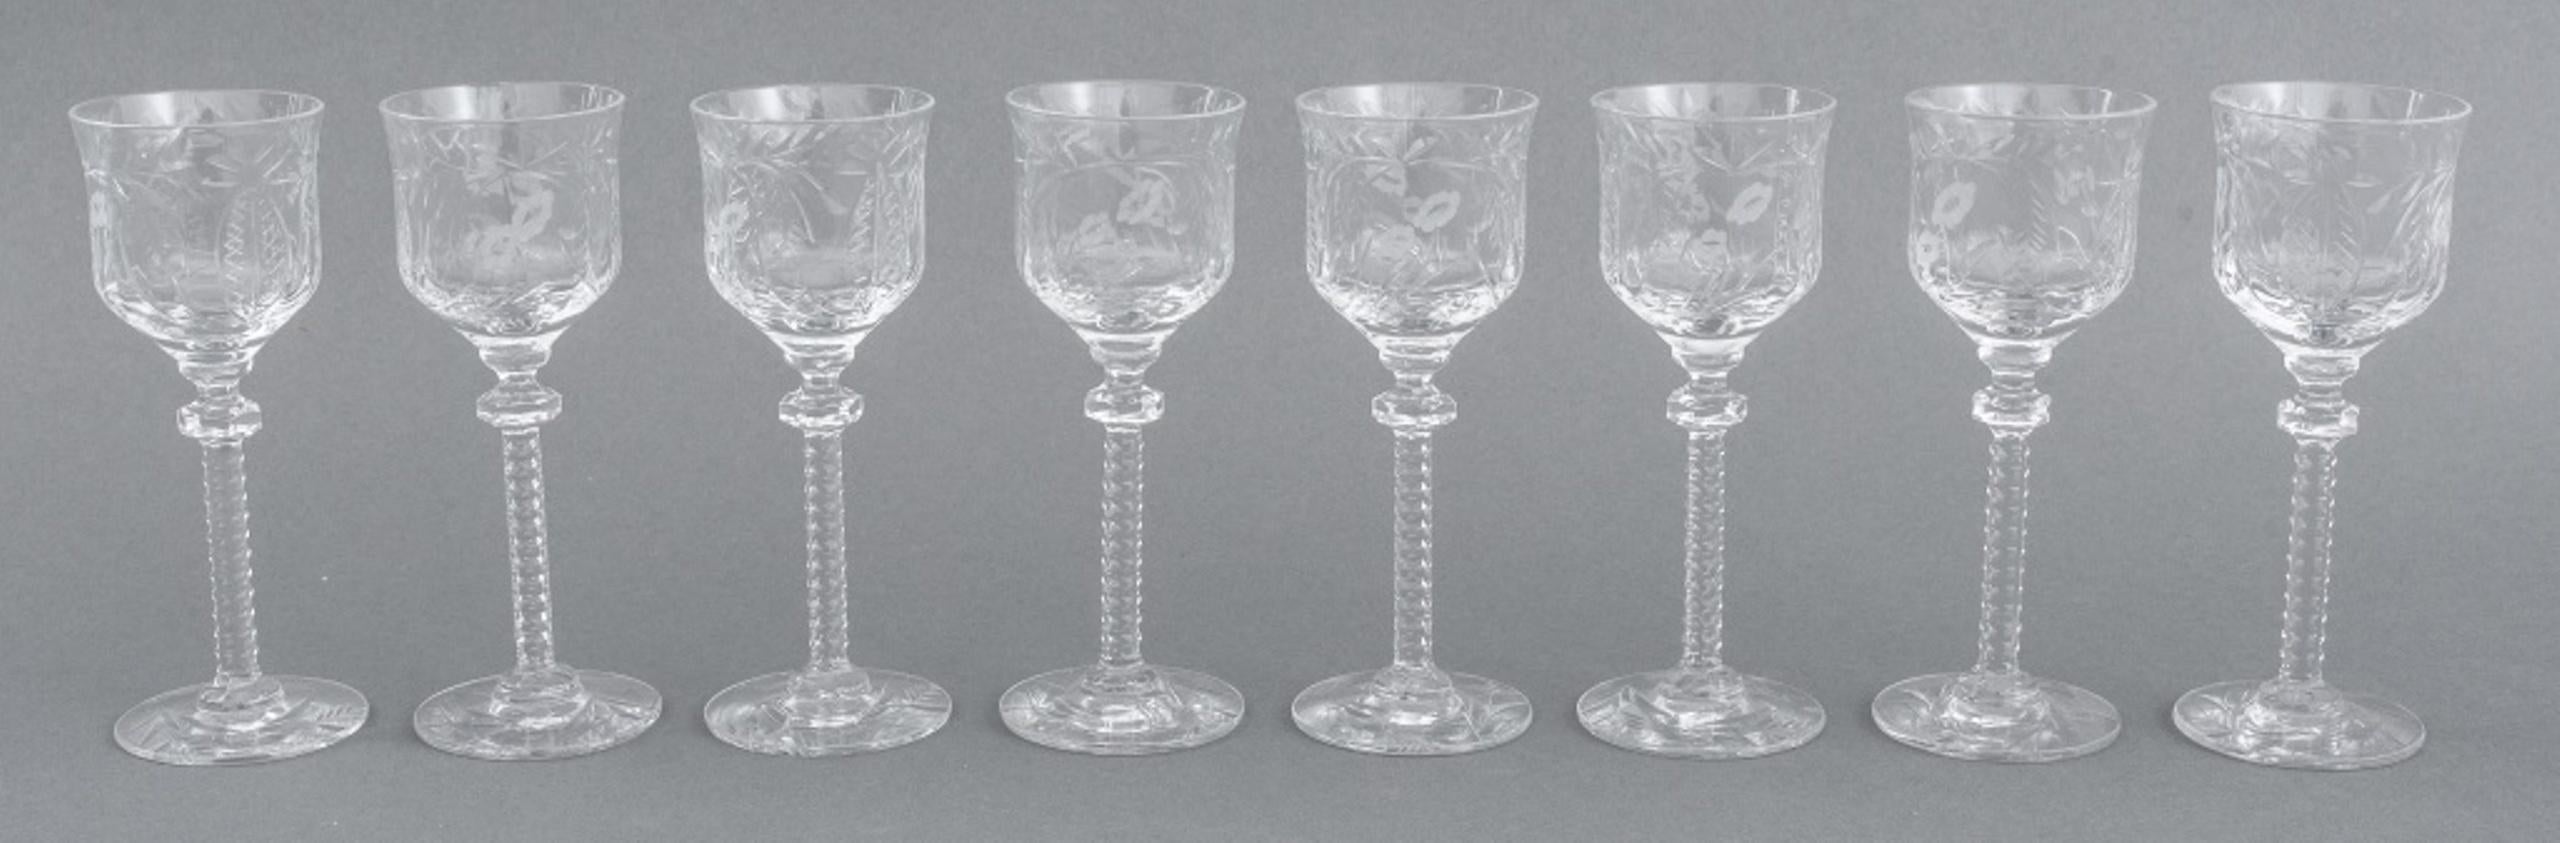 Rock Sharpe Cut Crystal Assembled Stemware, Set of 52 In Good Condition For Sale In New York, NY